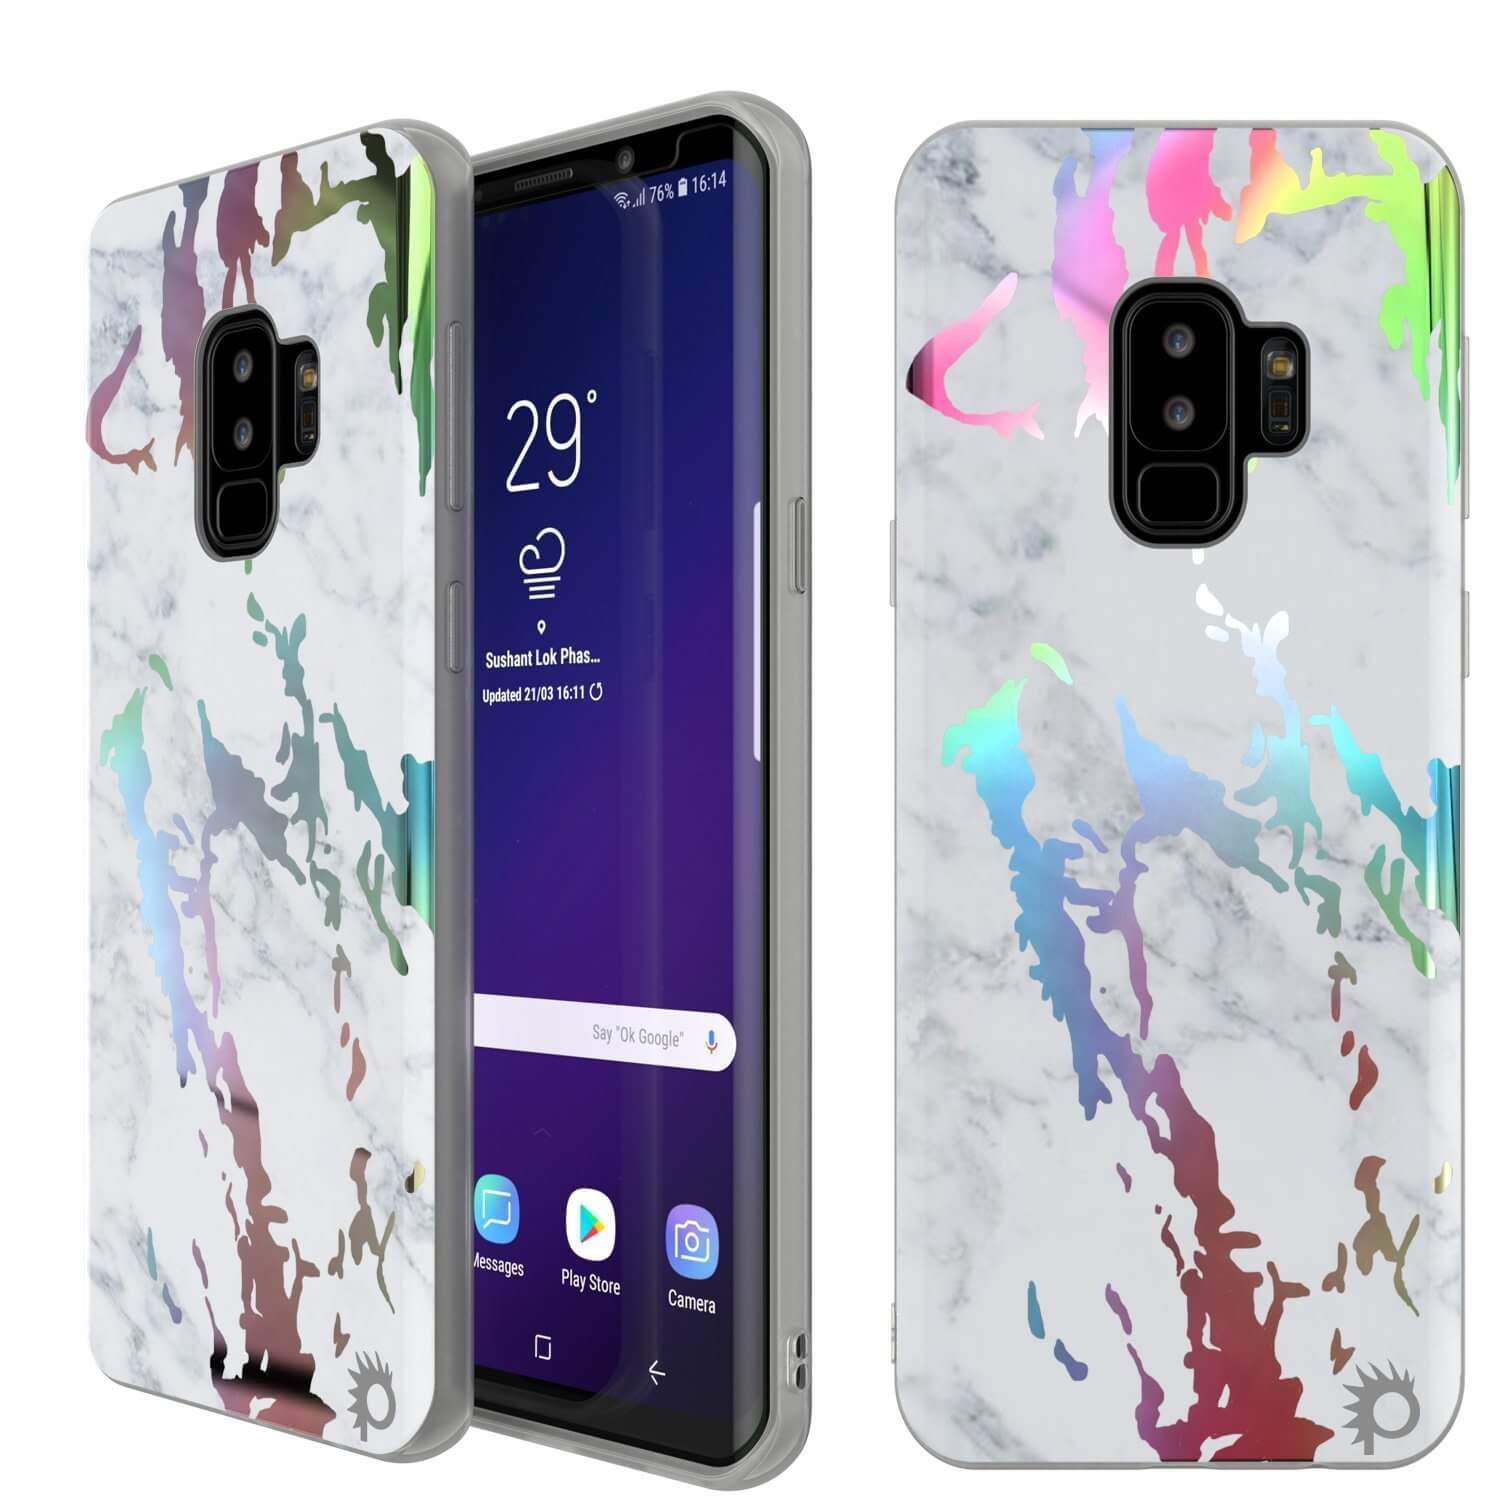 Punkcase Galaxy S9+ Marble Case, Protective Full Body Cover W/PunkShield Screen Protector (Blanco Marmo)